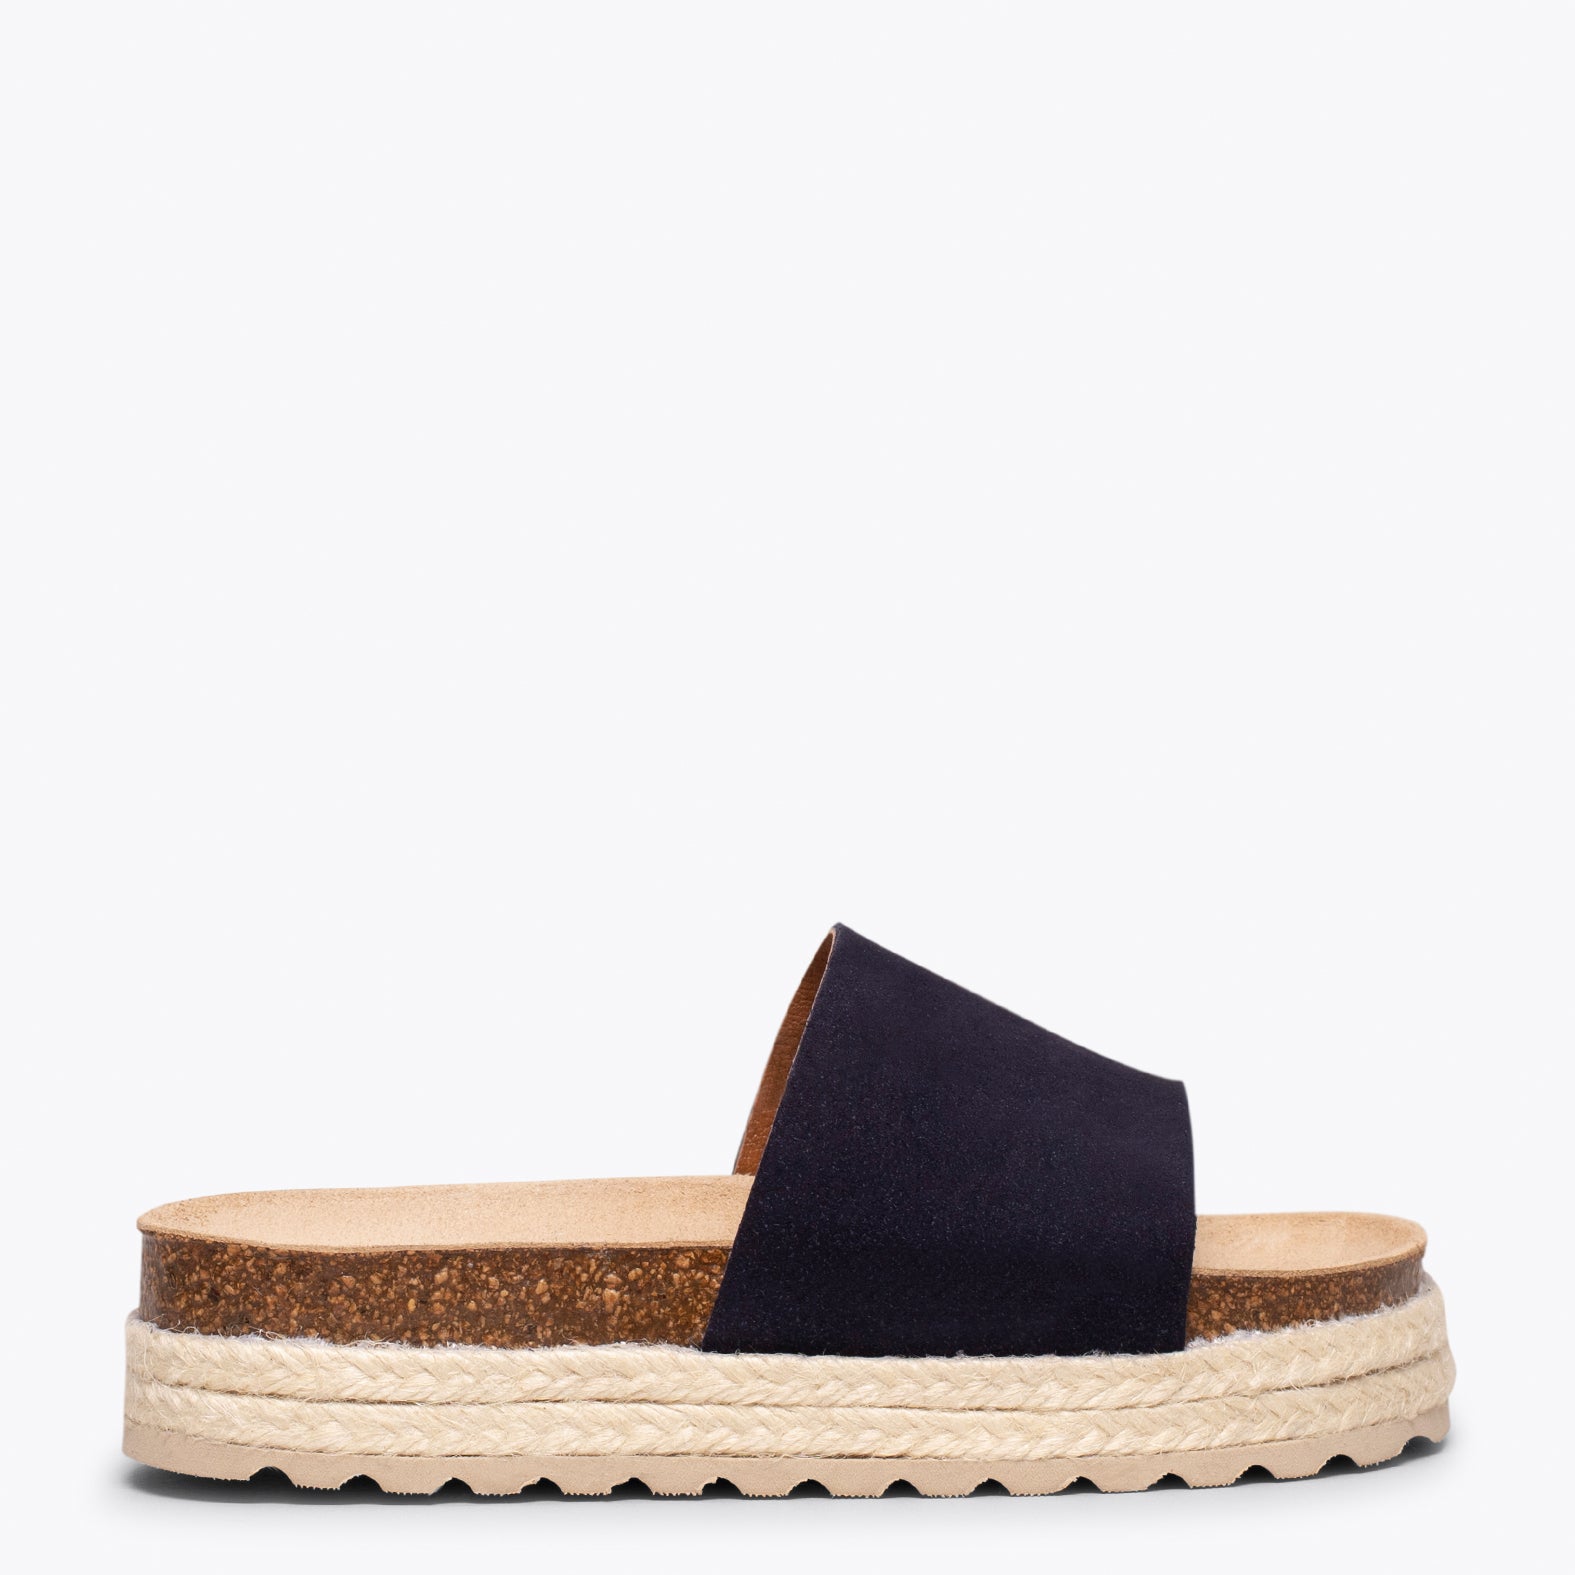 STRAWBERRY – NAVY flat sandals for girls